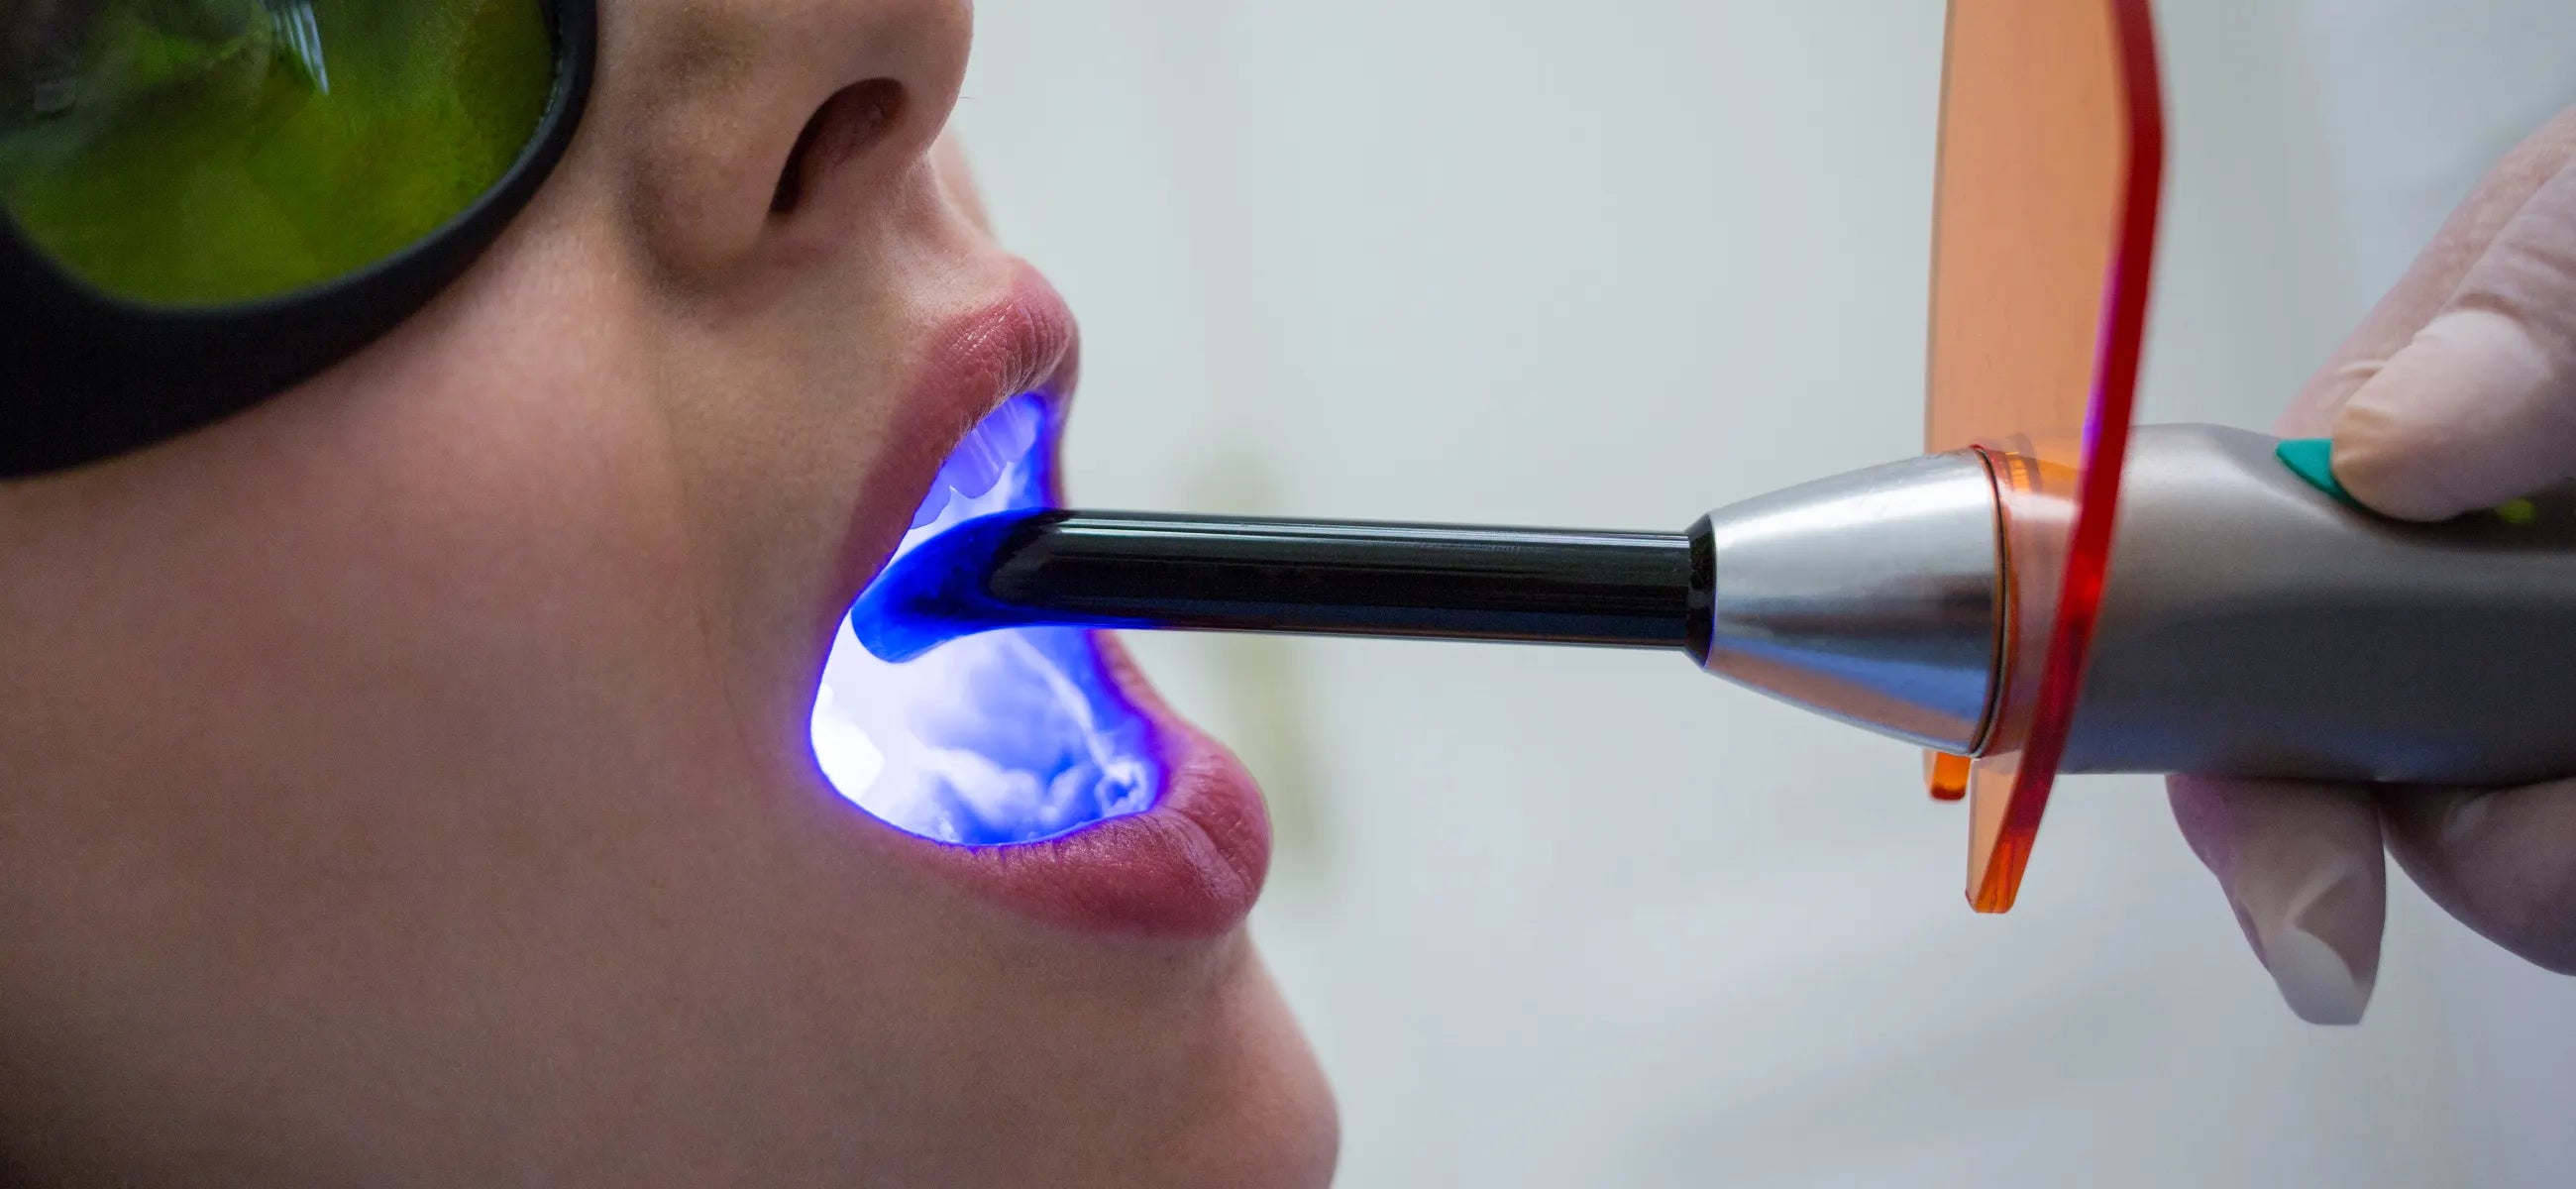 Teeth whitening 101 - what is laser teeth whitening and how does it work?